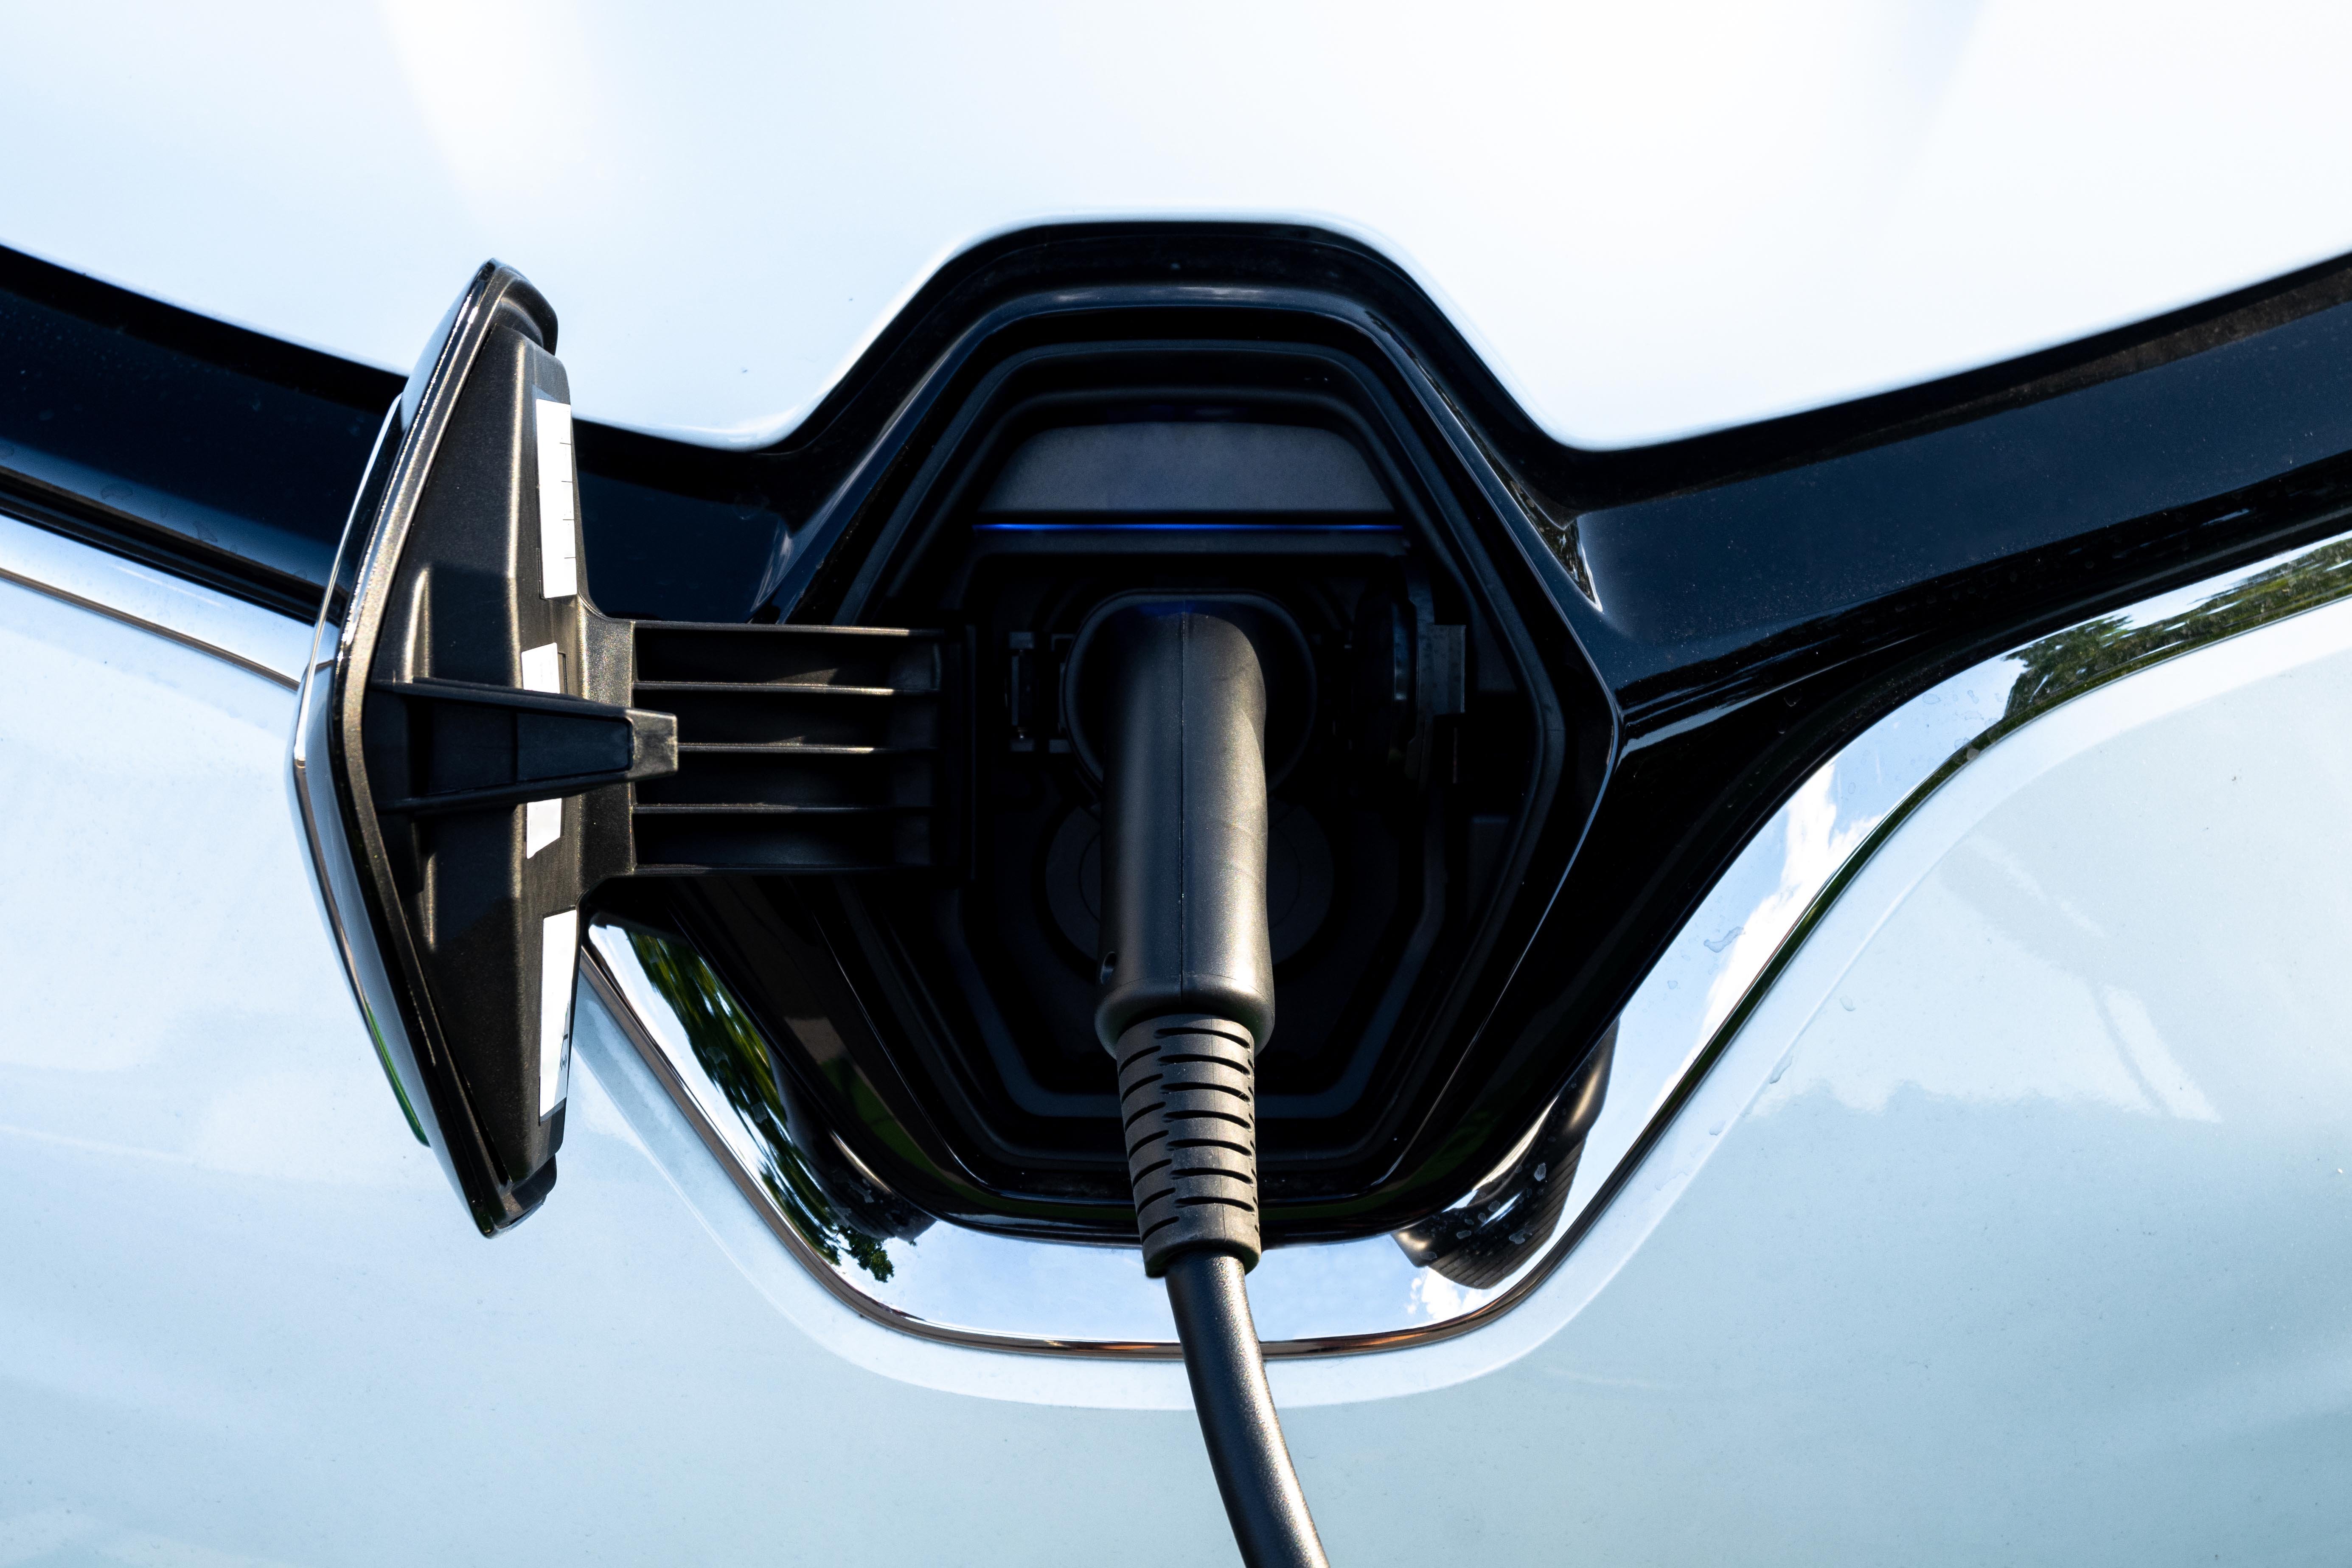 car-recharges-its-electric-batteries-inside-private-garage-with-its-own-charging-station-detail-connected-plug